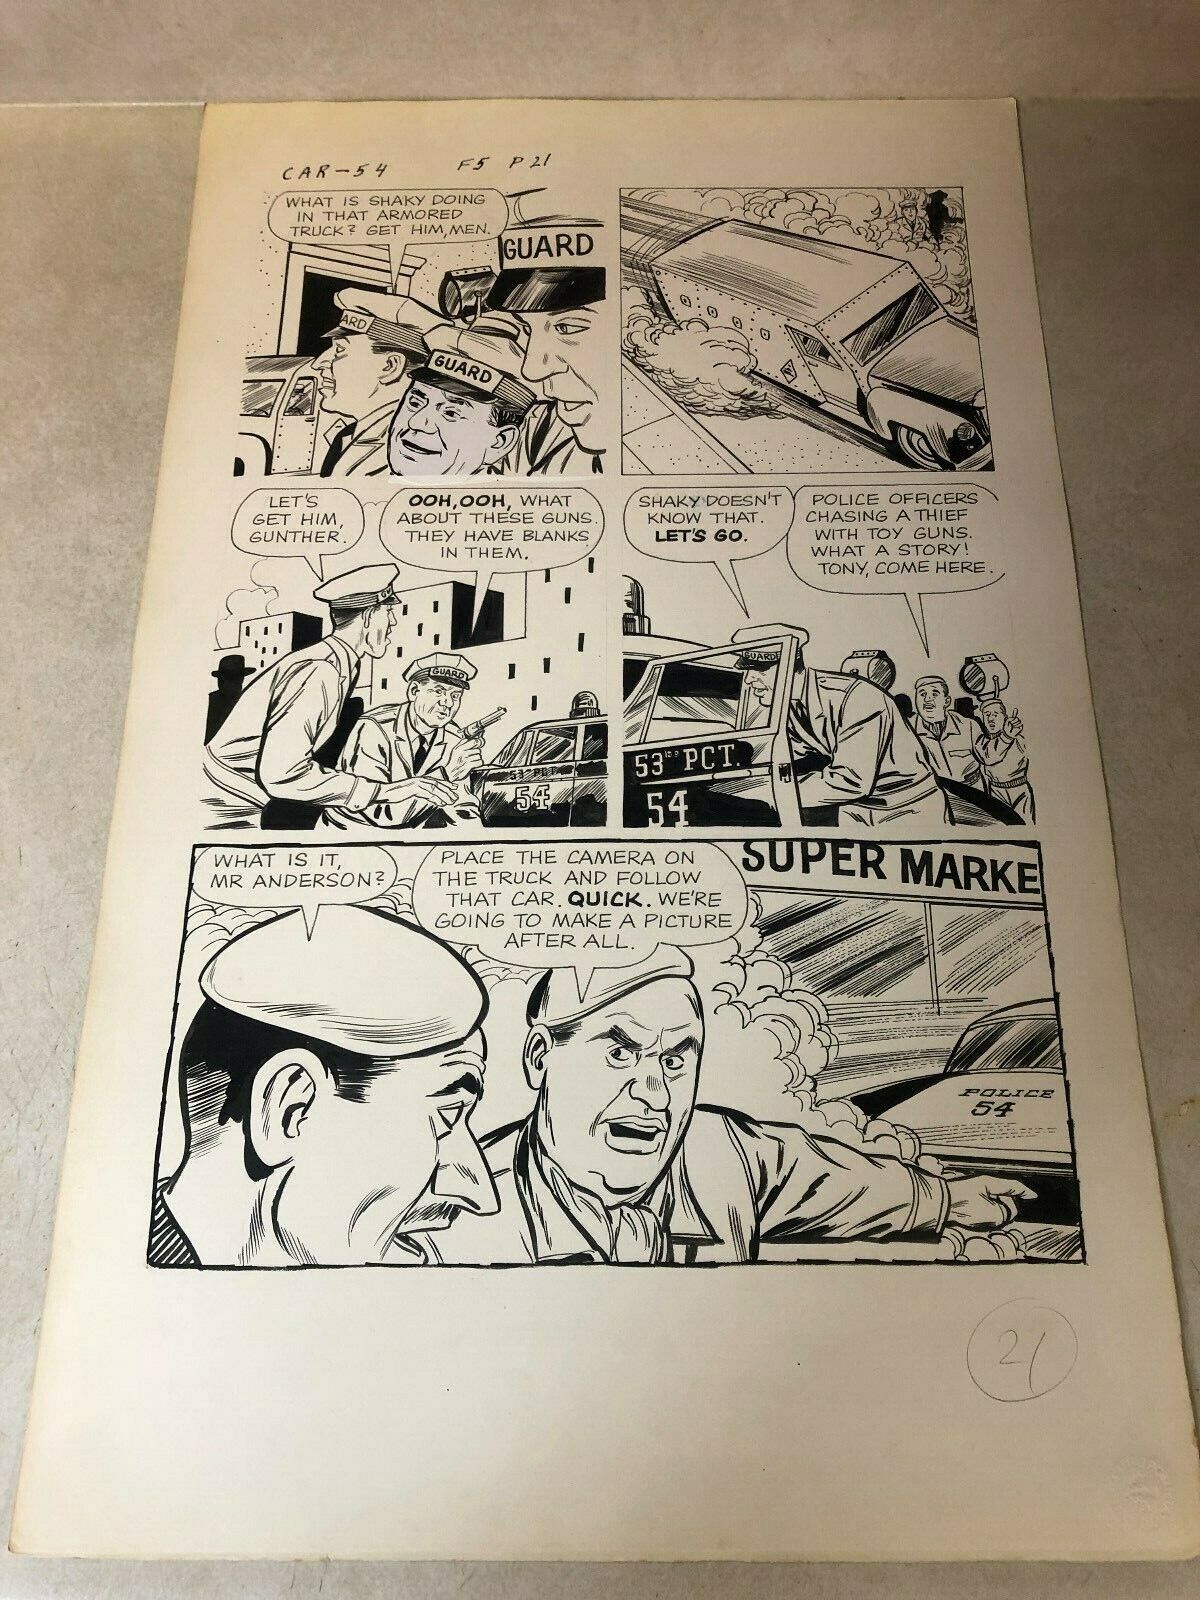 Car 54 #5 original art POLICE tv comic 1963 chase ARMORED CAR with TOY GUNS